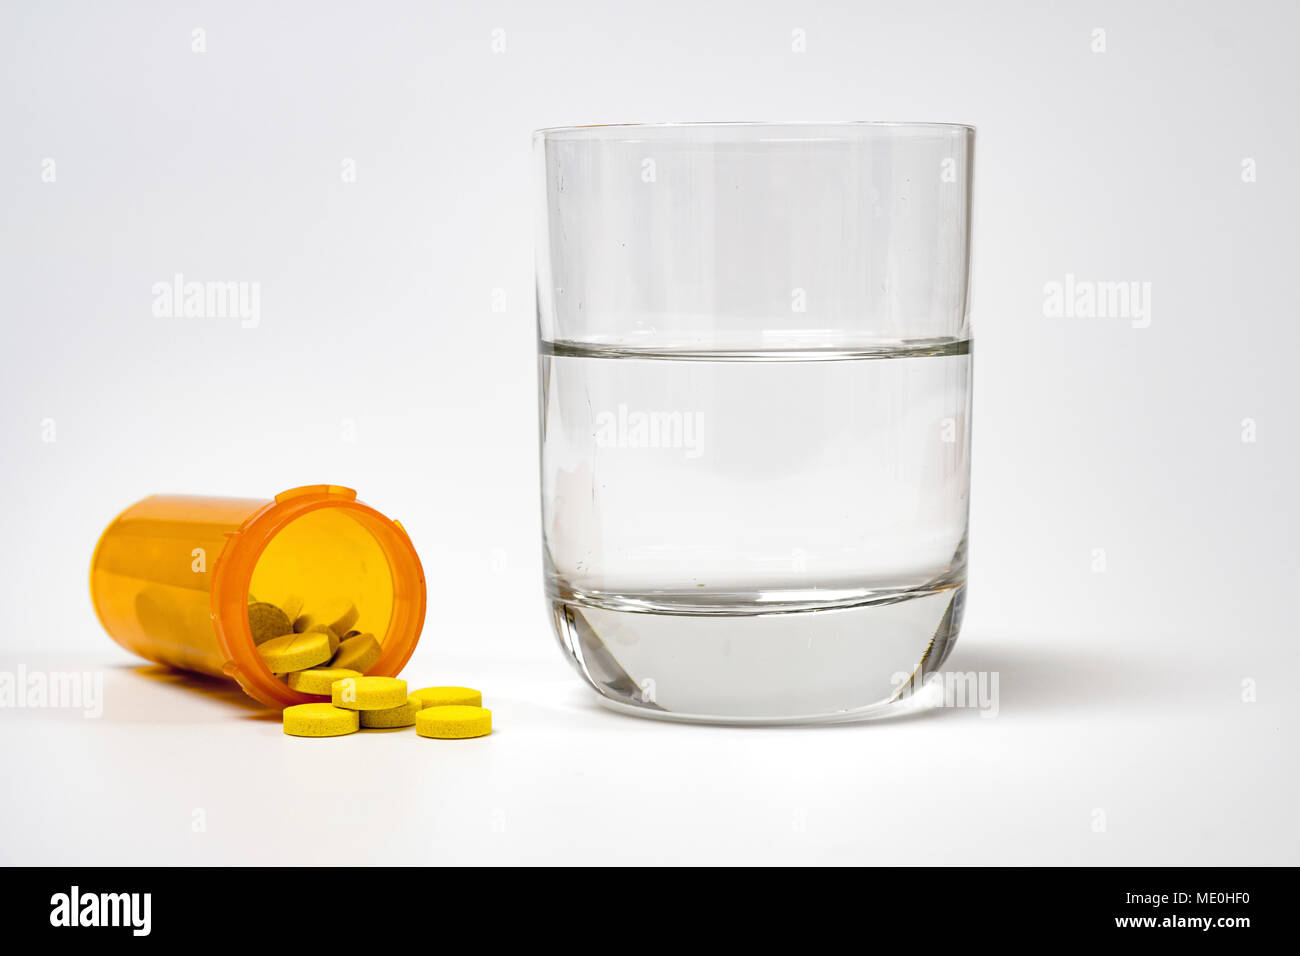 Medication and glass of water on a white background. Stock Photo